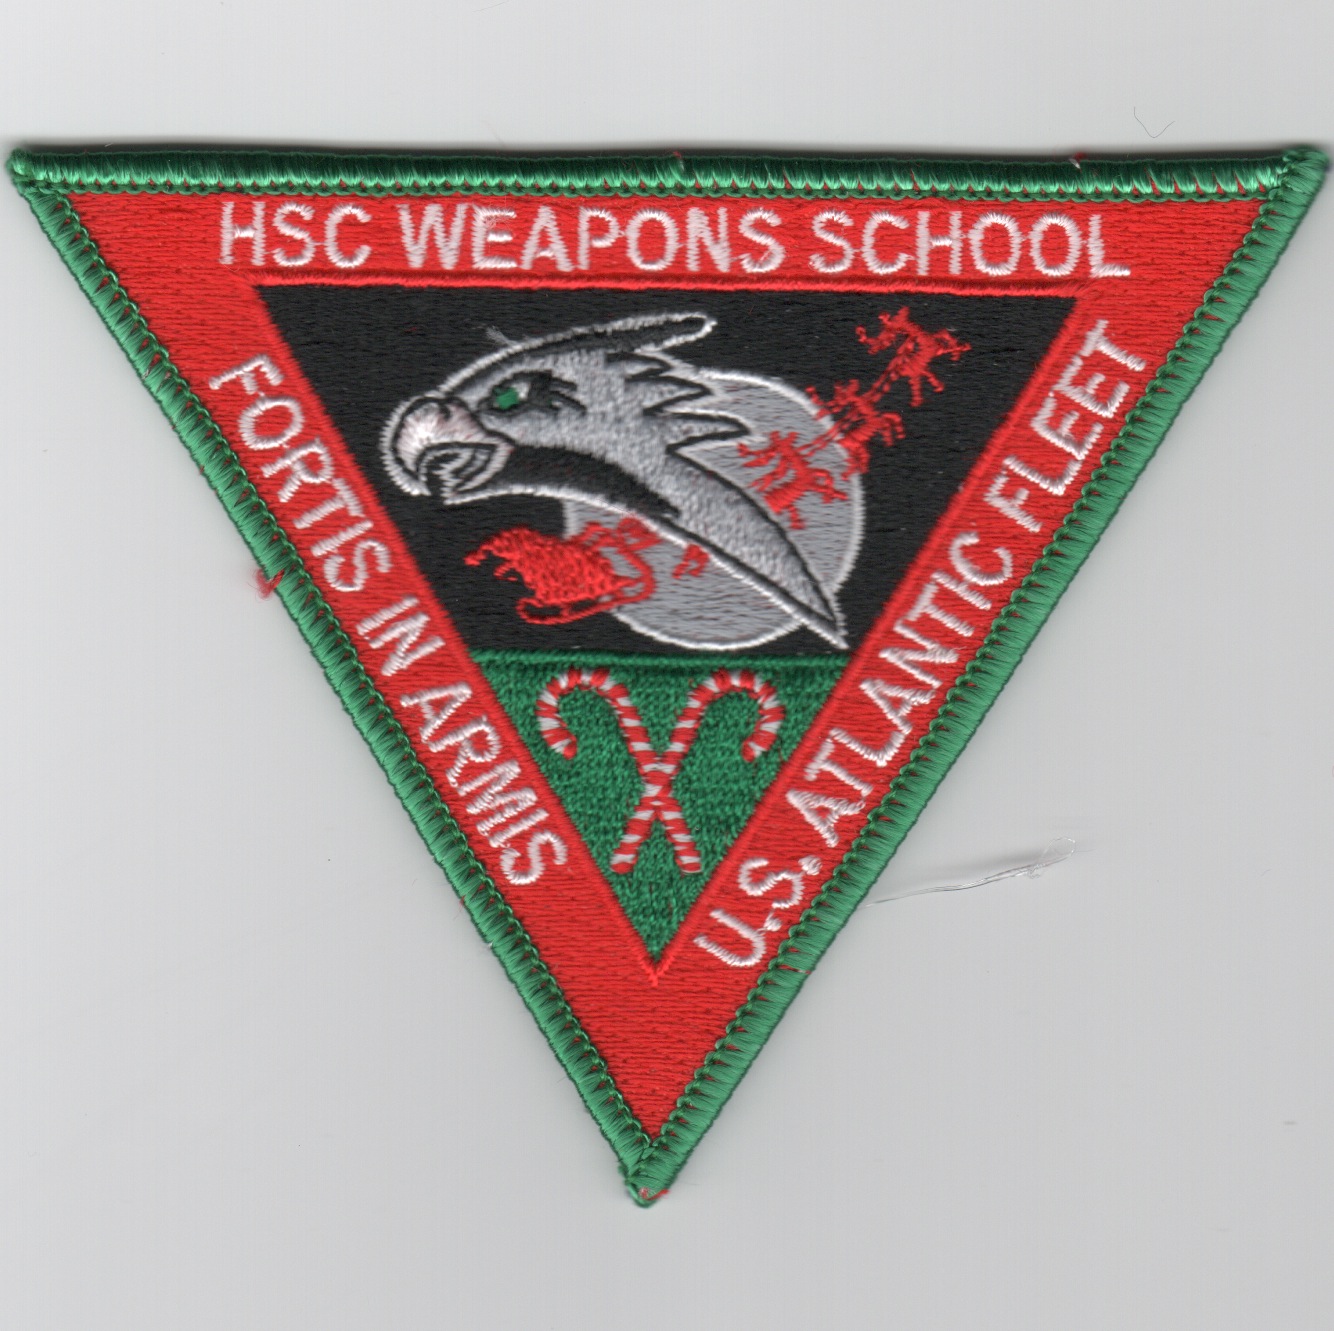 HSC Weapons School (Christmas)